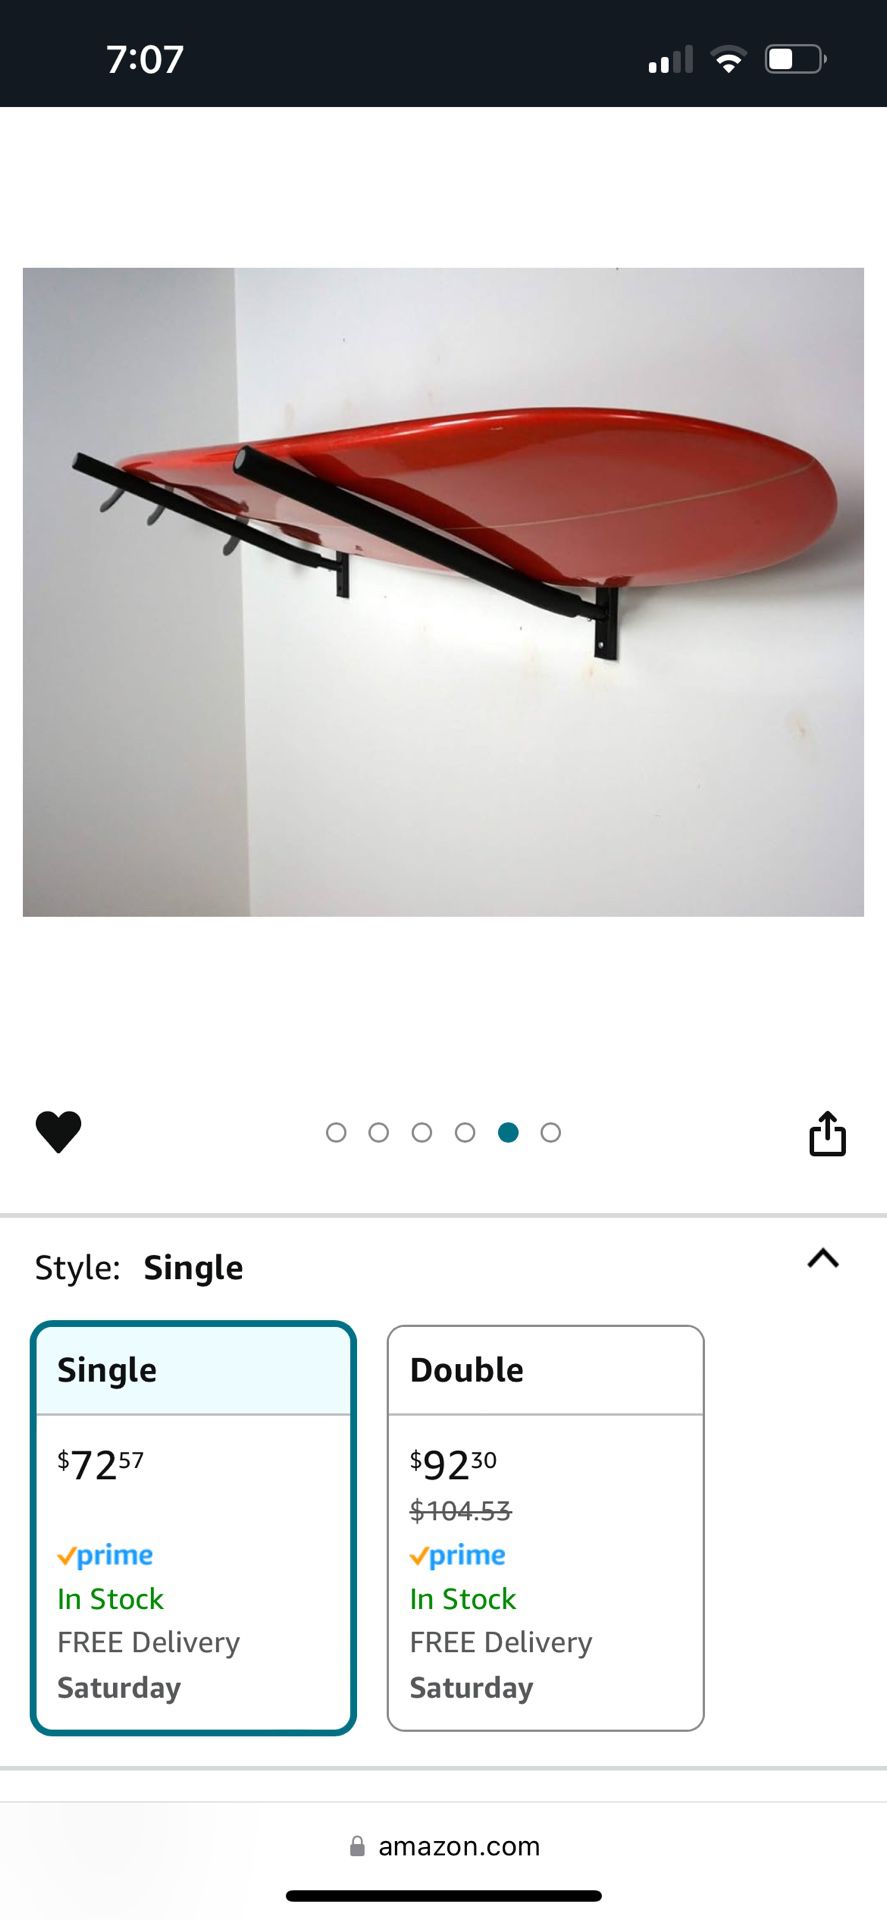 Wall Mount Angled Storage Rack For Paddle Board